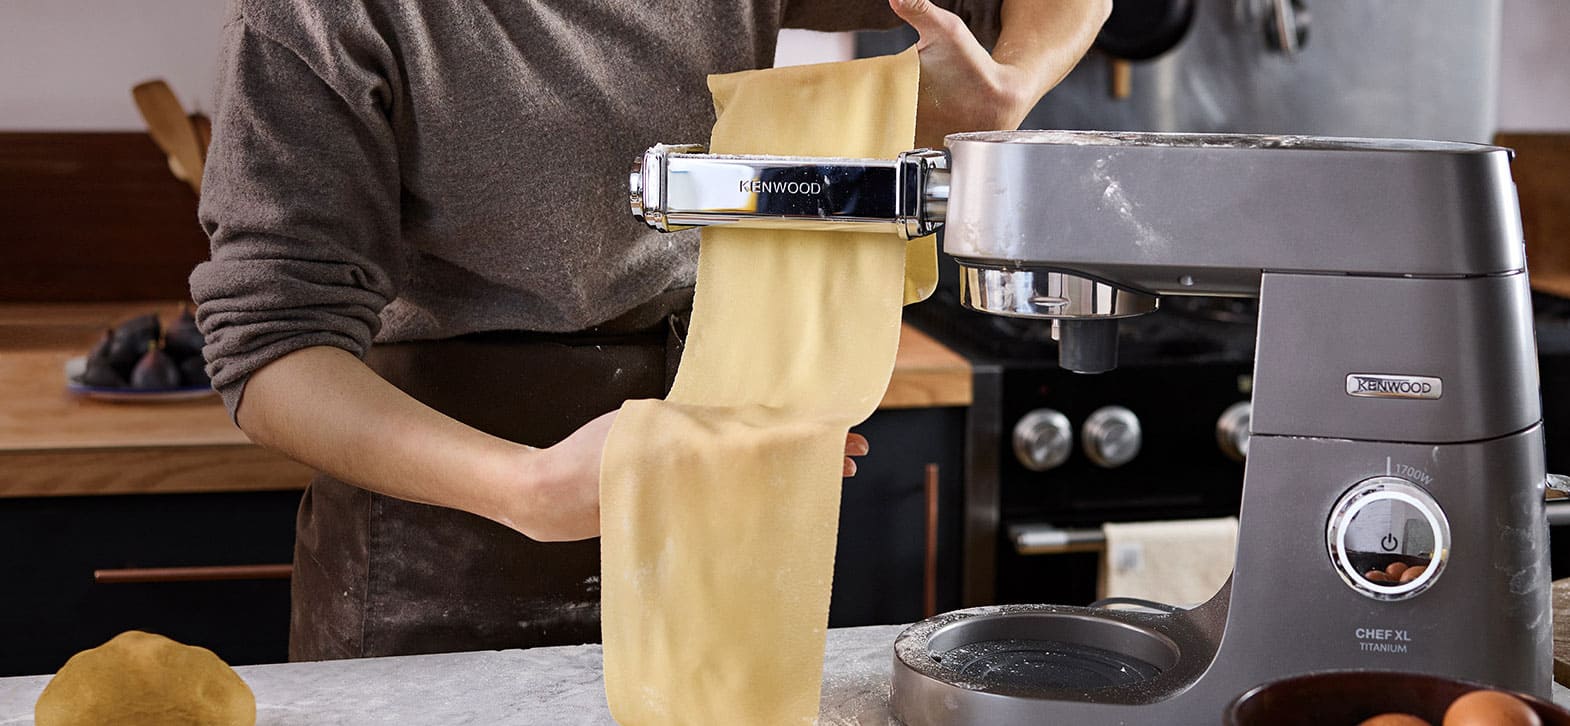 Chef Attachments - Explore your creativity | Kenwood UK